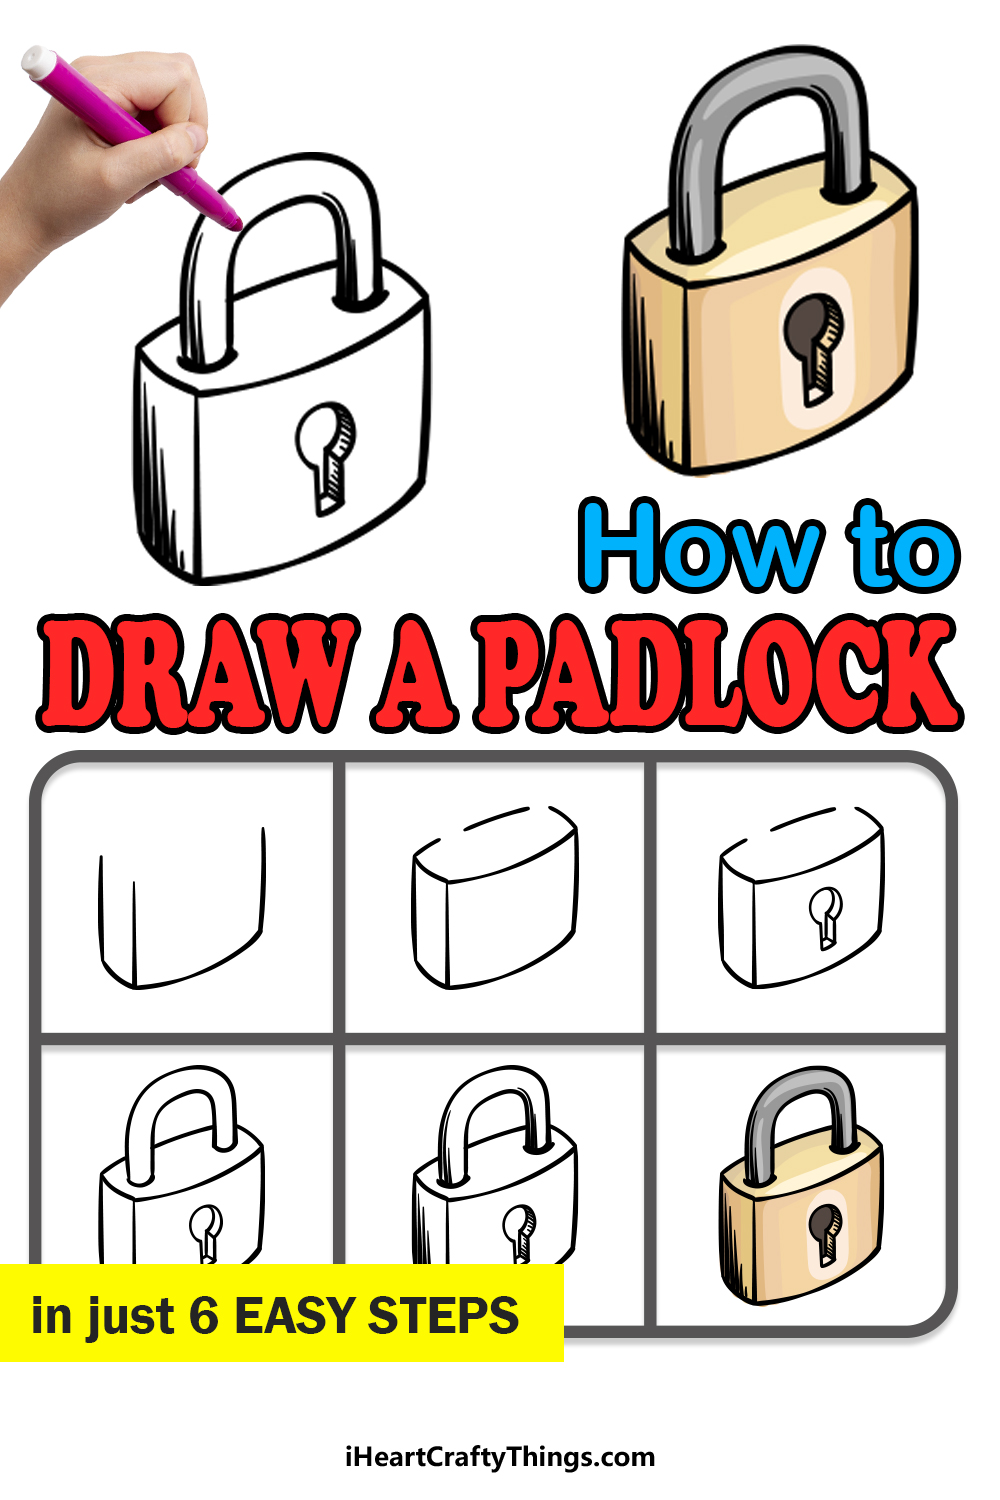 how to draw a Padlock in 6 easy steps